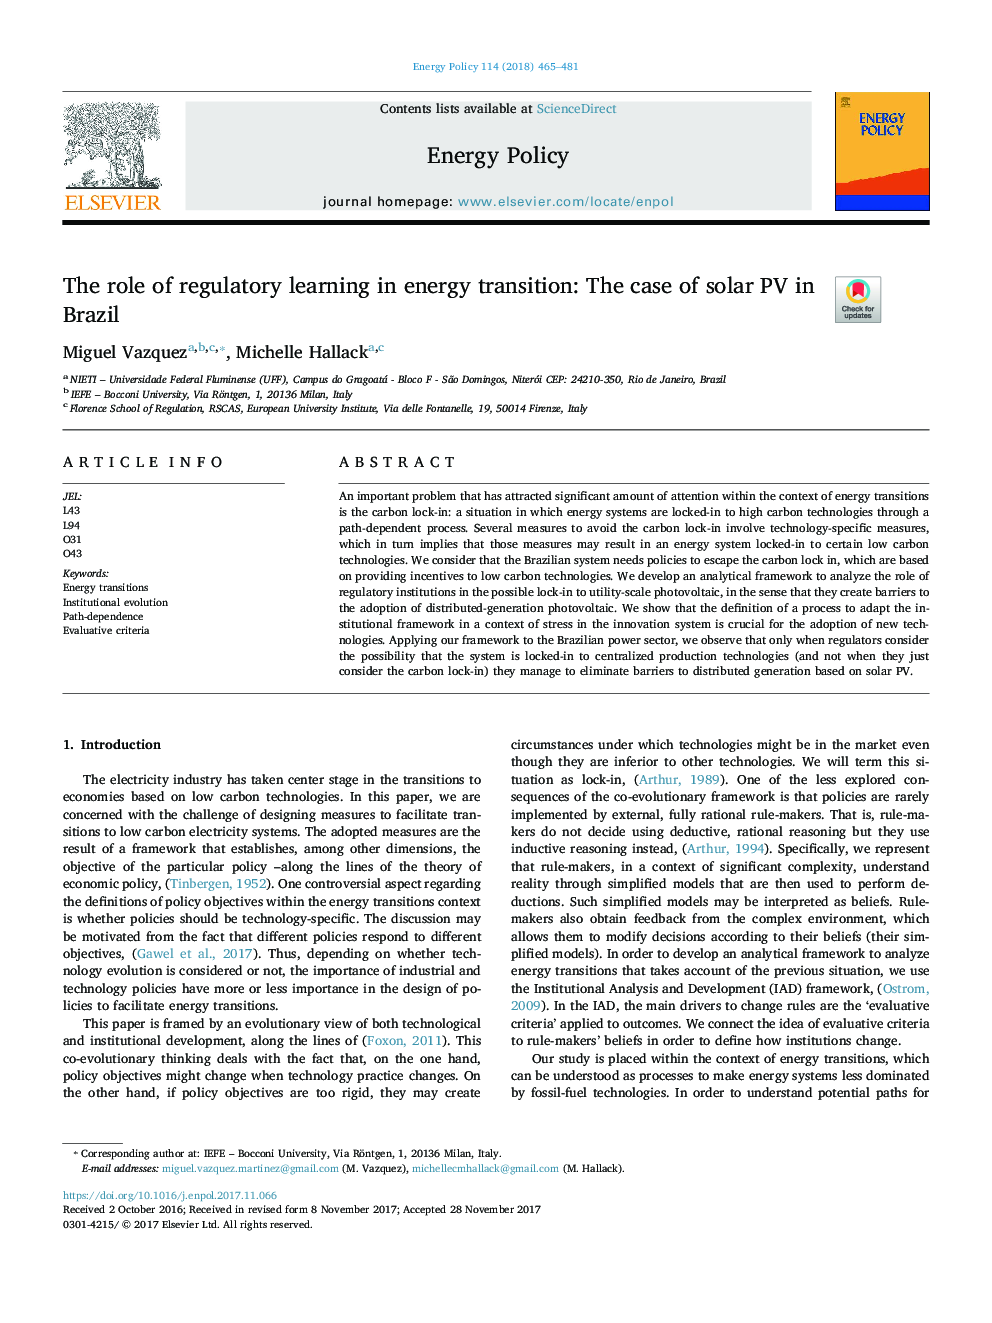 The role of regulatory learning in energy transition: The case of solar PV in Brazil